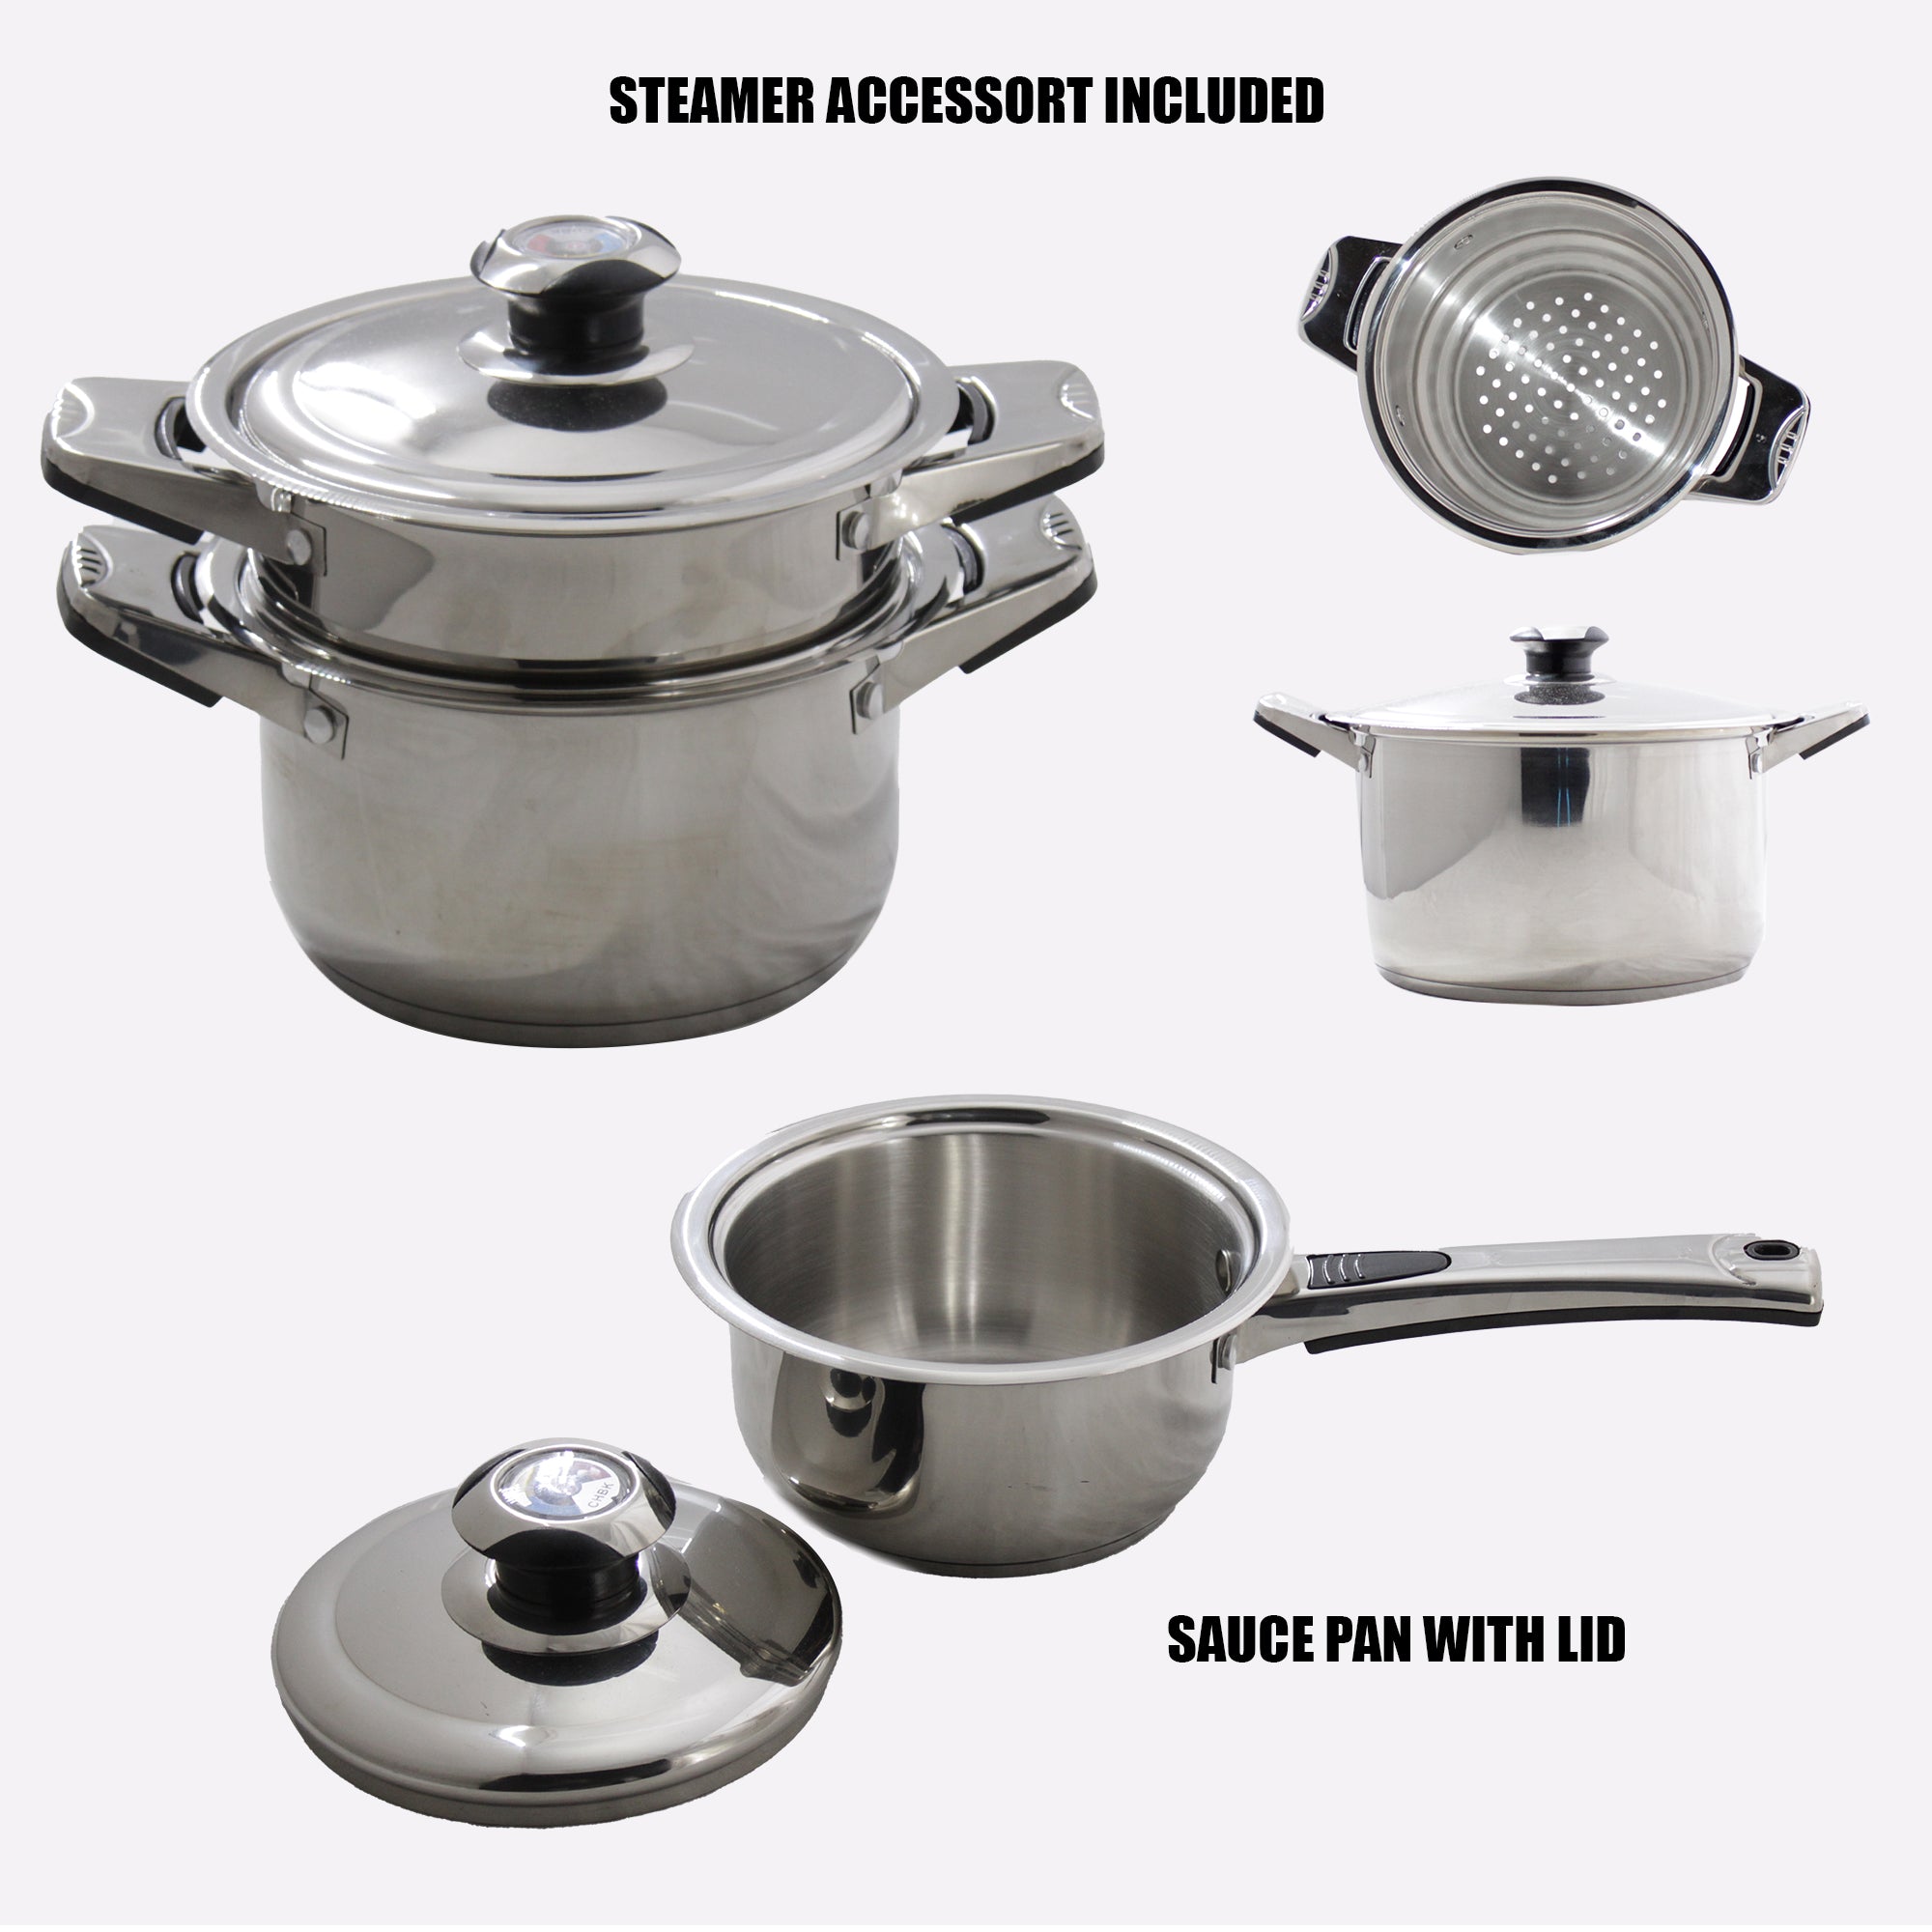 26 Piece Induction-Ready Layered S. Steel Cookware Set & Measuring Spoons